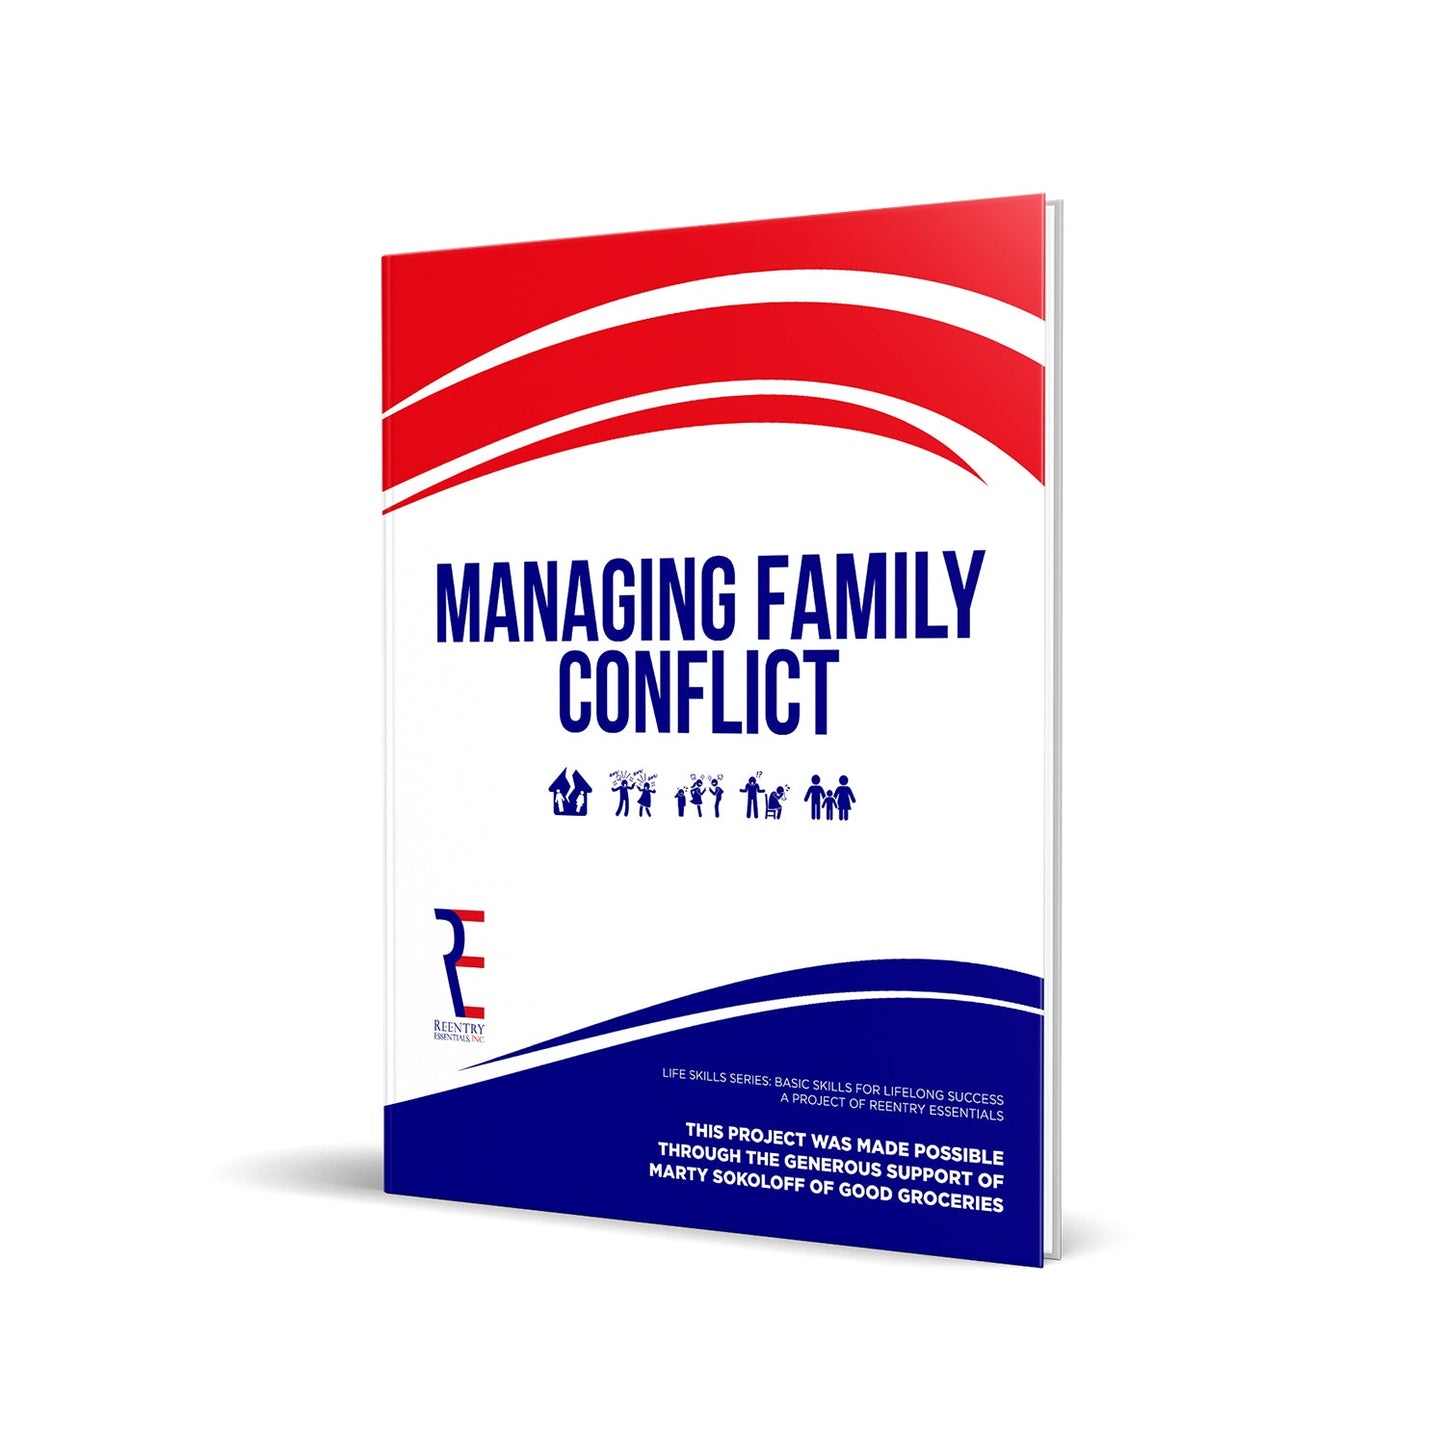 LSS - MANAGING FAMILY CONFLICT